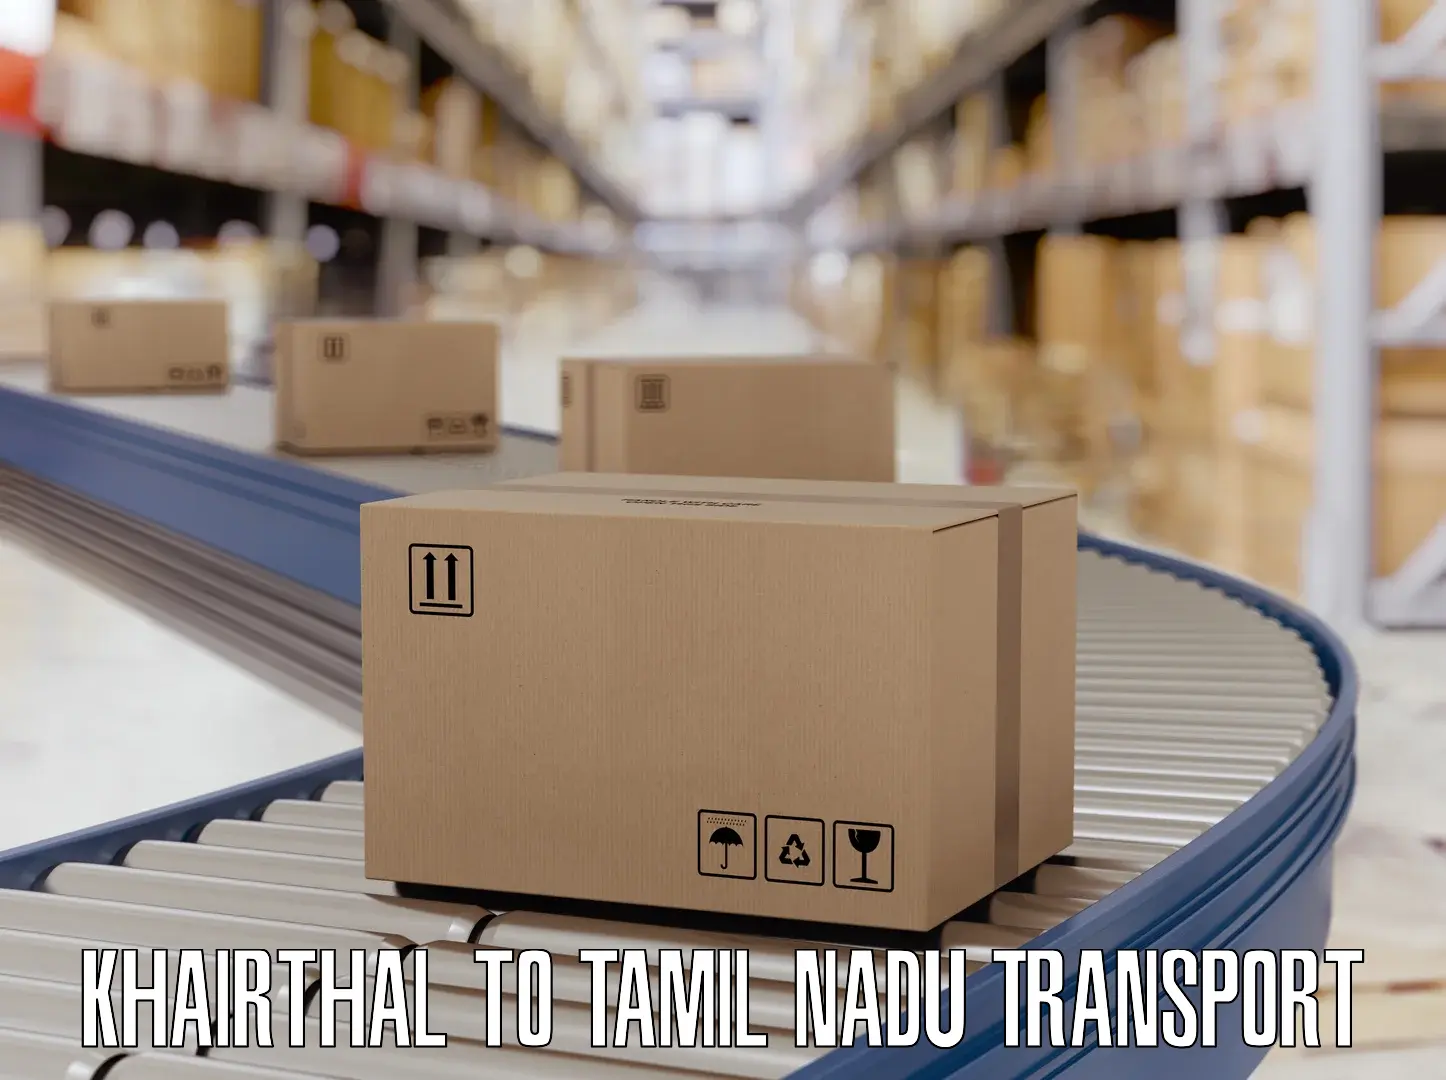 Interstate transport services Khairthal to Vellore